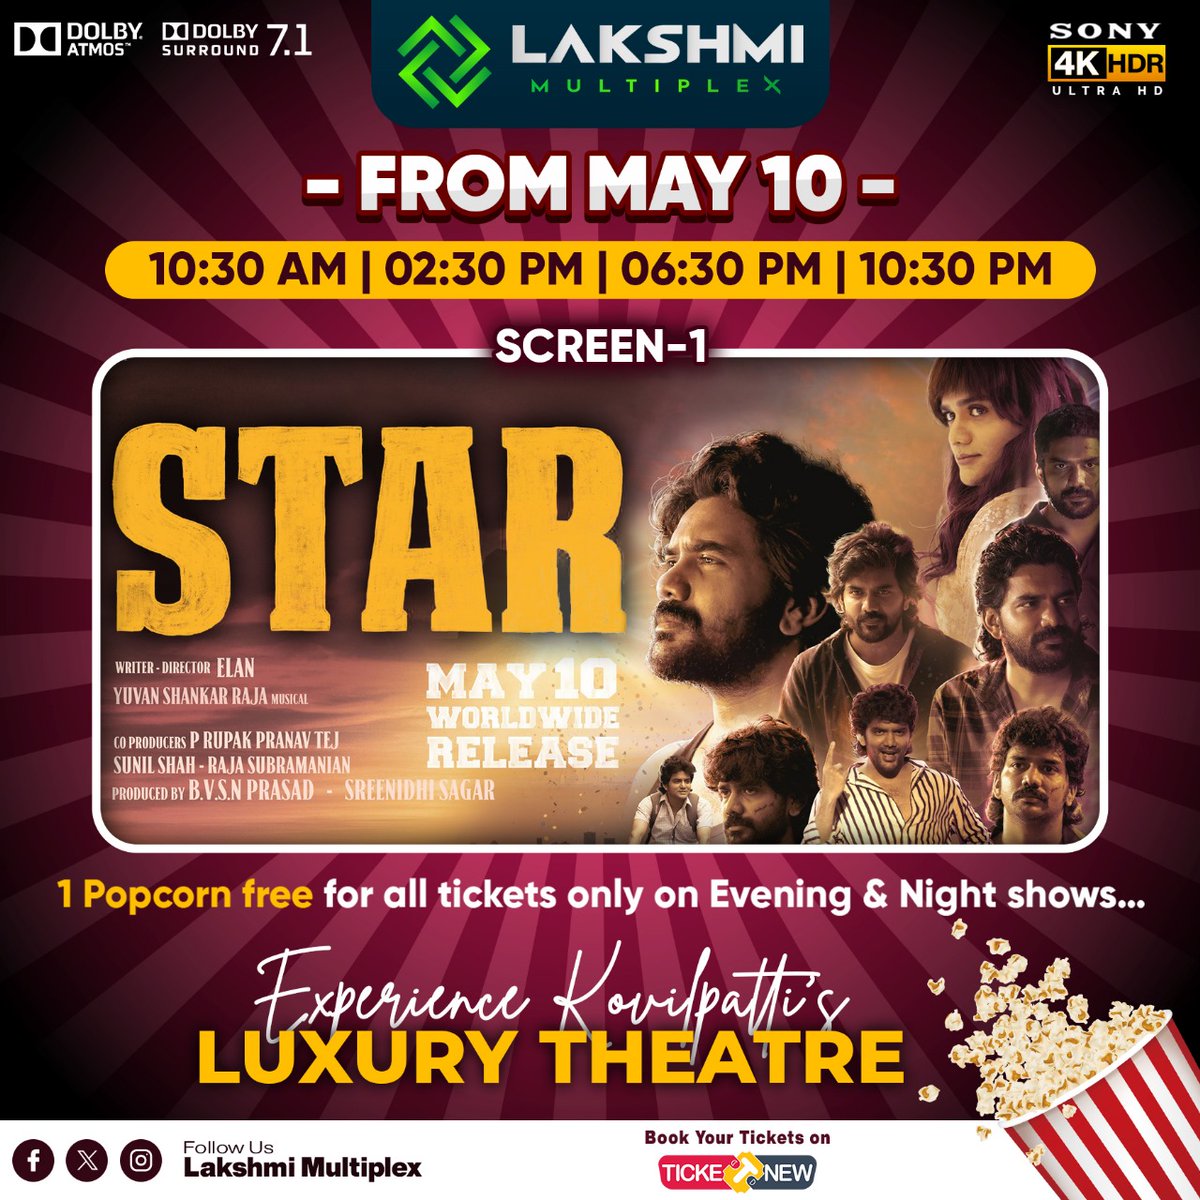 From May10 Onwards Star🤩✨ @lakshmimultiplex Screen 1 - Star 🤩💥✨ @lakshmimultiplex 1 Popcorn Free for all tickets only on evening & Night show's 😍🍿 Experience Kovilpatti's Luxury Theatre 🤩✨ #lakshmimultiplex #kovilpatti #kovilpattitheatre #STAR #kavin